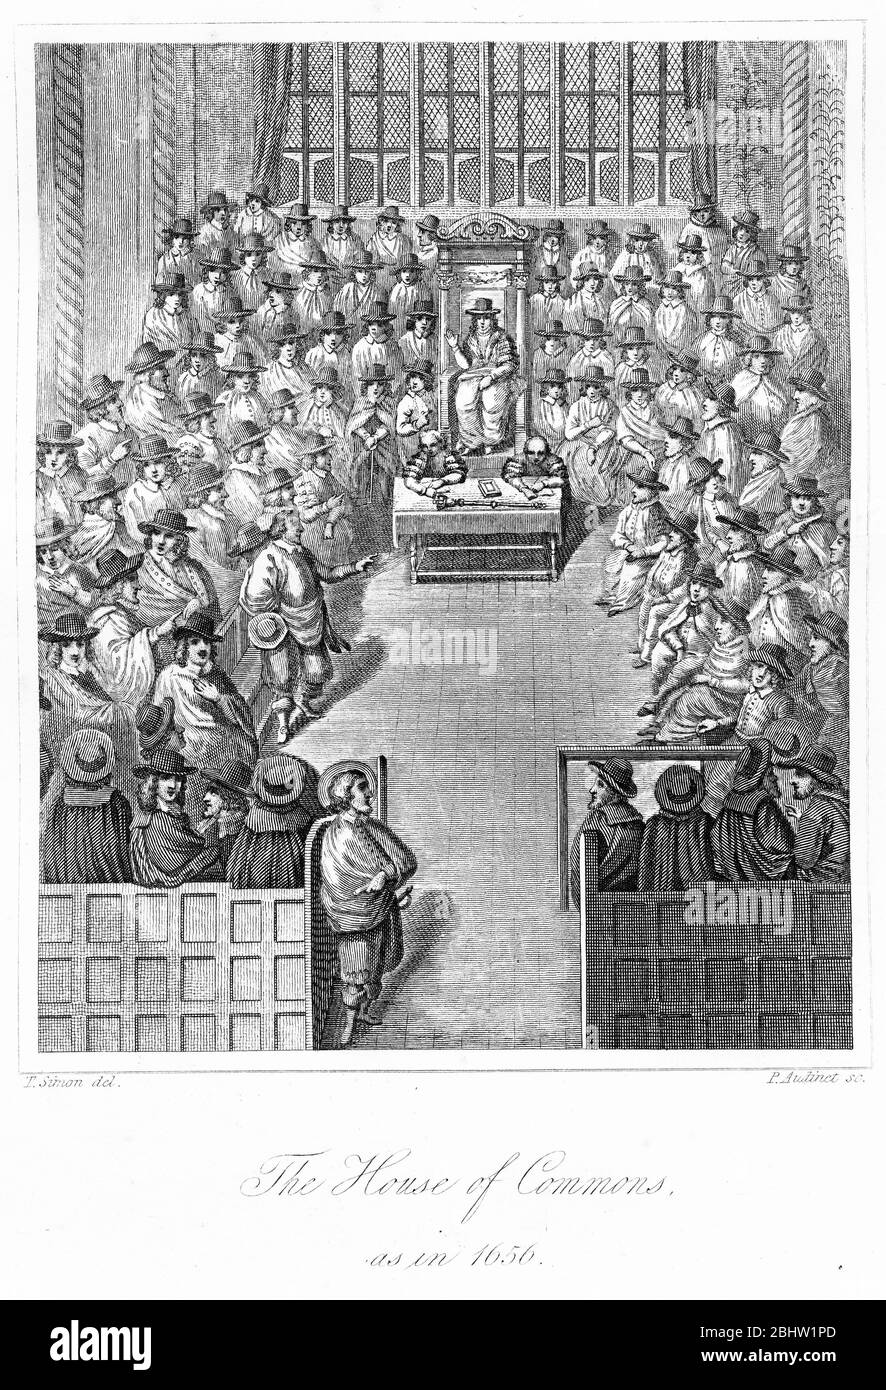 Engraving of the  House of Commons sitting in 1656. The Second Protectorate Parliament in England sat for two sessions from 17 September 1656 until 4 February 1658, with Thomas Widdrington as the Speaker of the House of Commons. Parliament was summoned reluctantly by the Lord Protector Oliver Cromwell on the advice of the Major-Generals who were running the country as regions under military governors. (Wikipedia) Stock Photo